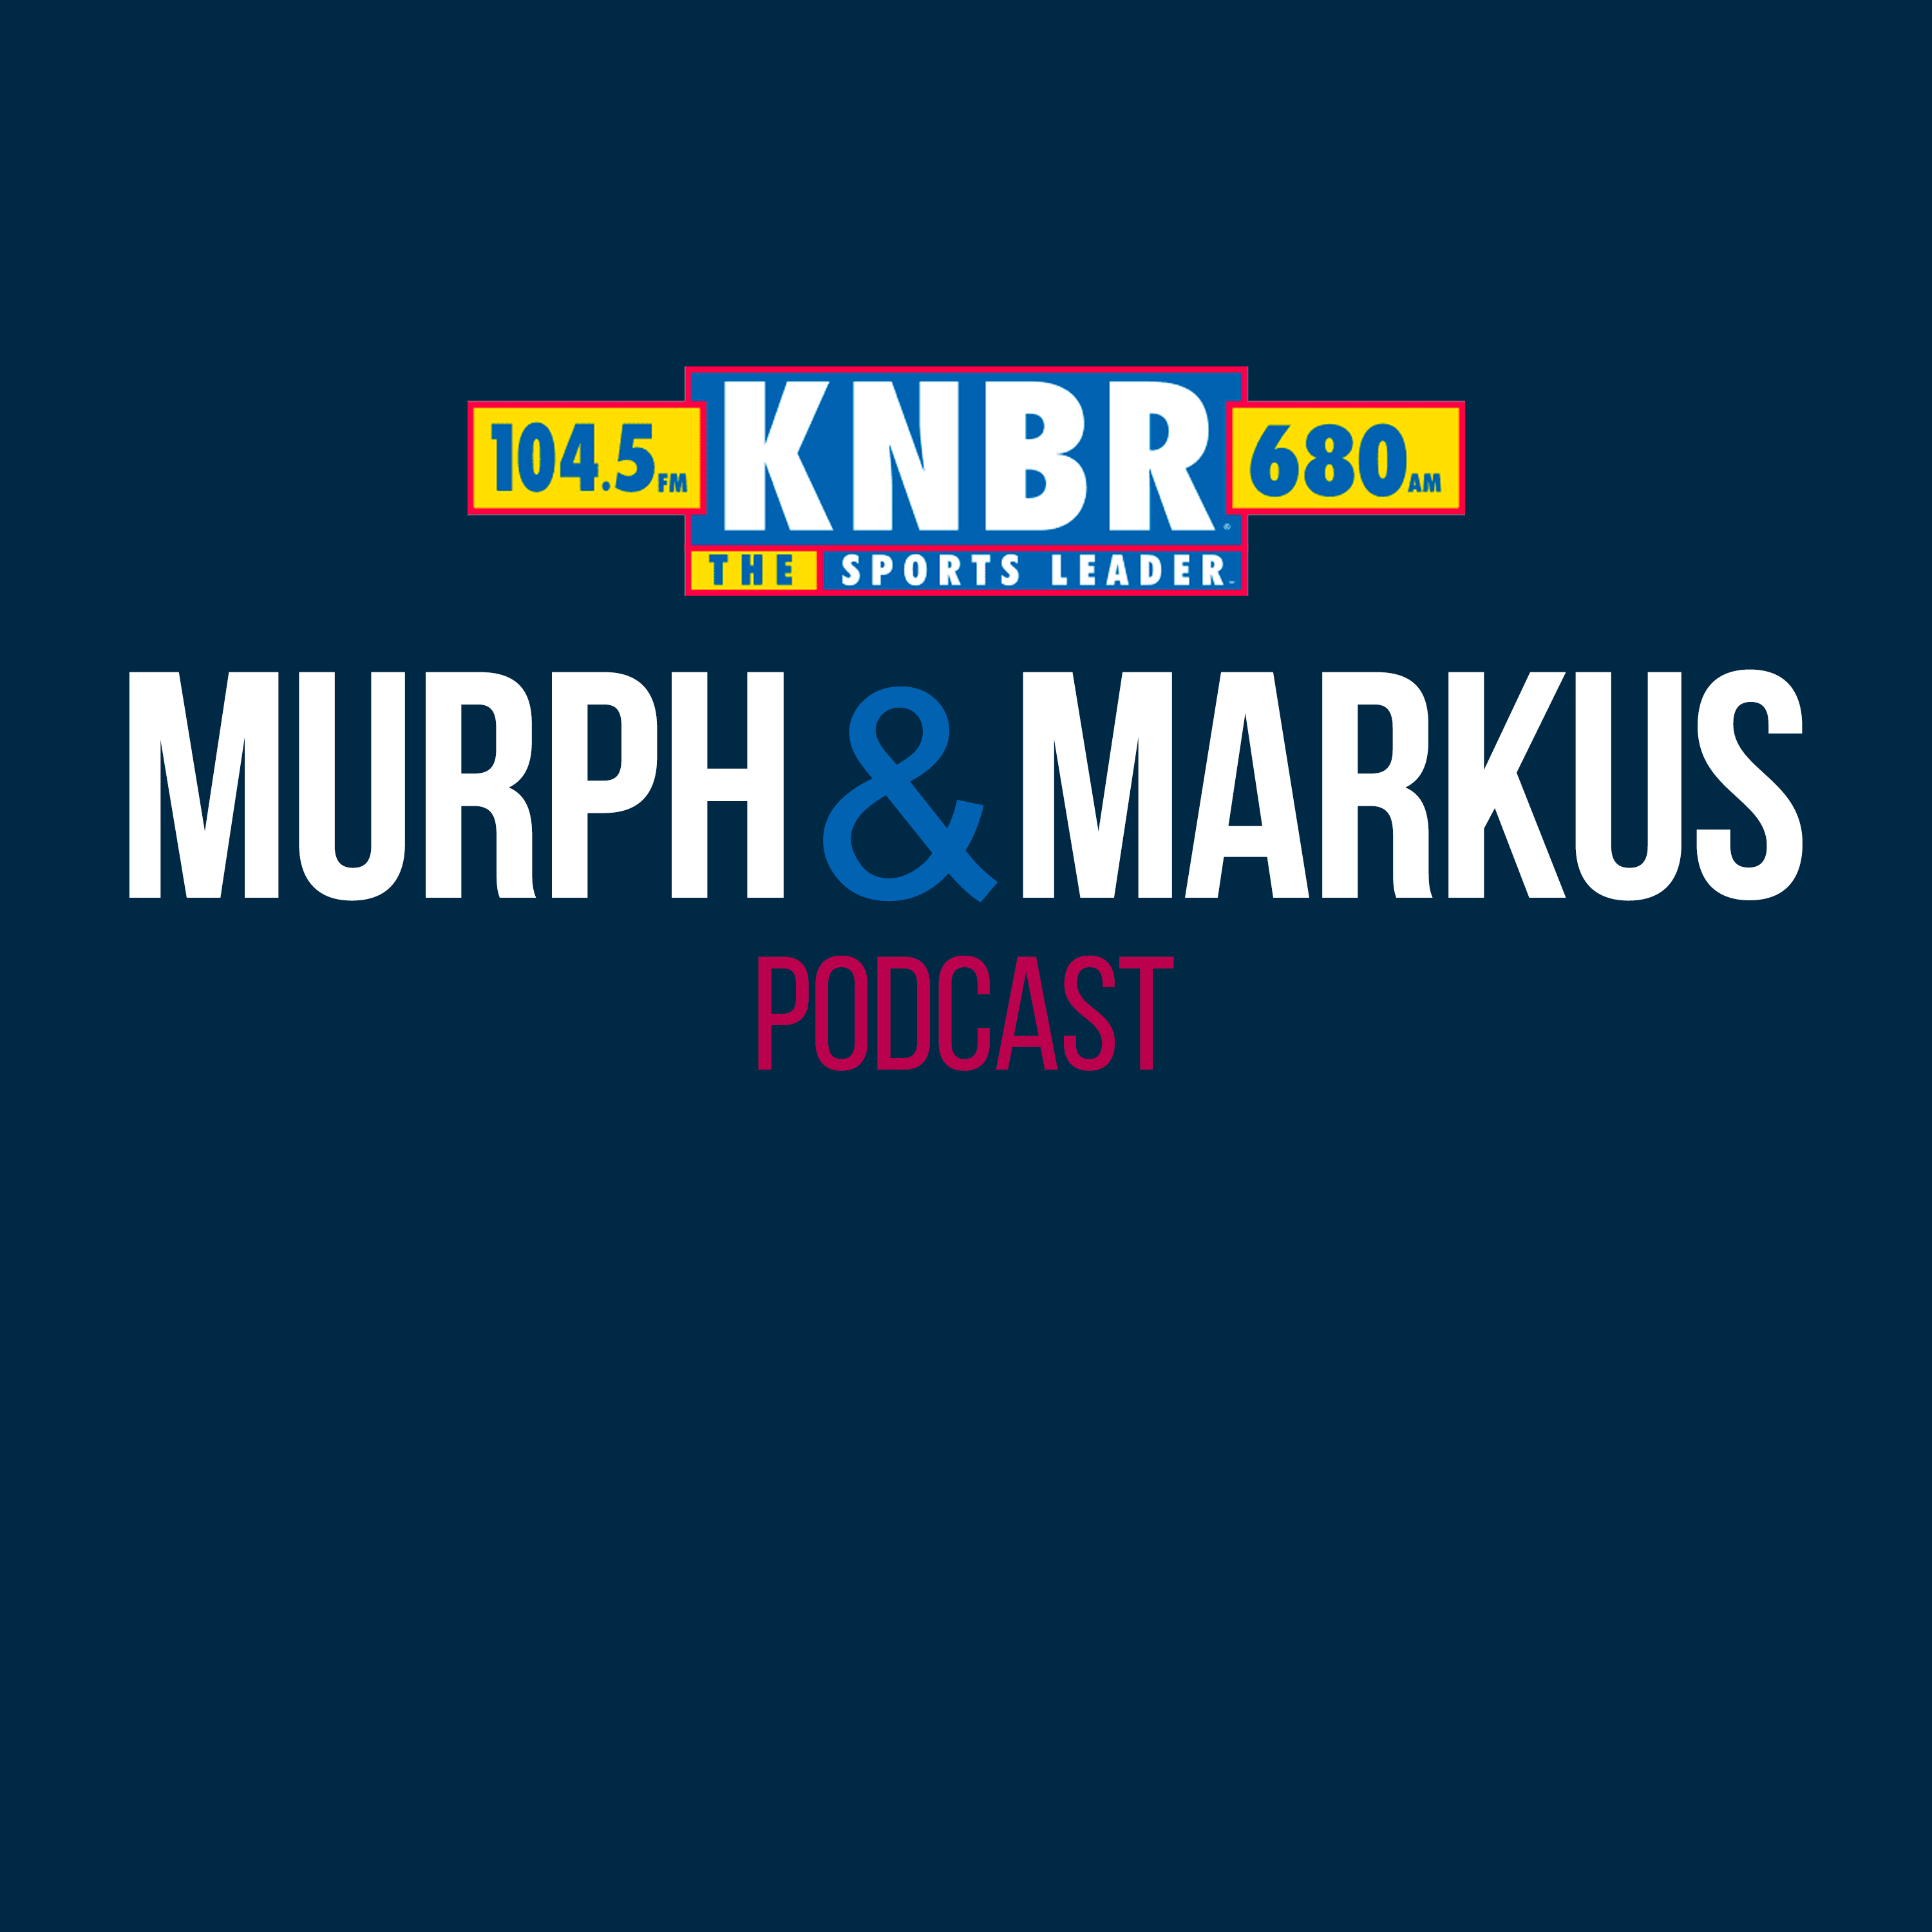 4-2 Hour 1: Murph & Markus are back! The guys react to game 1 of the Giants vs Dodgers series, preview the Mavericks vs Warriors game tonight, & discuss the state of the Giants bullpen